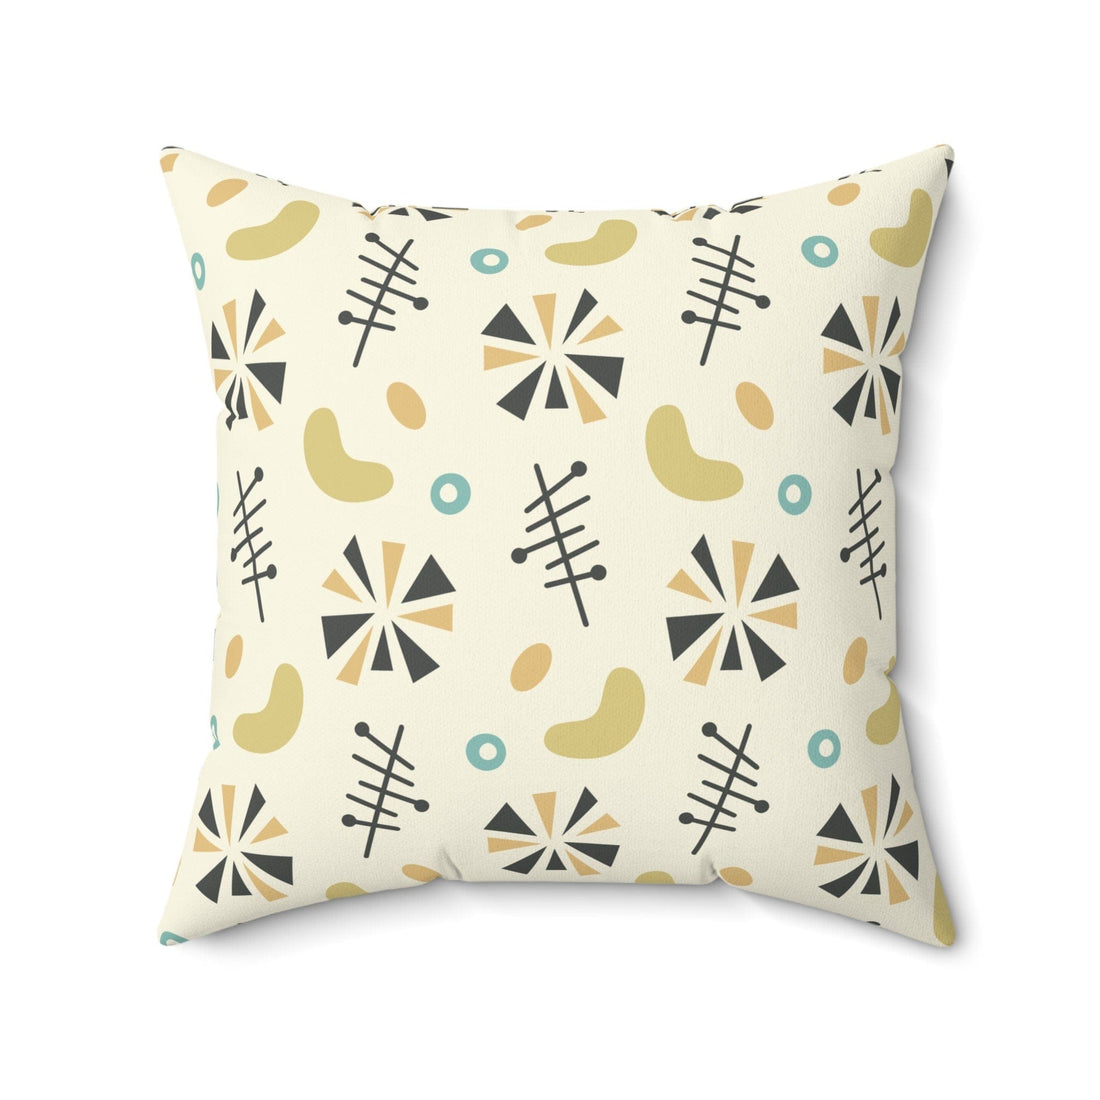 Kate McEnroe New York Mid Century Modern Decor Throw Pillows with Inserts, Retro 1950s Starburst and Boomerang Accent CushionsThrow Pillows24387325485699441777